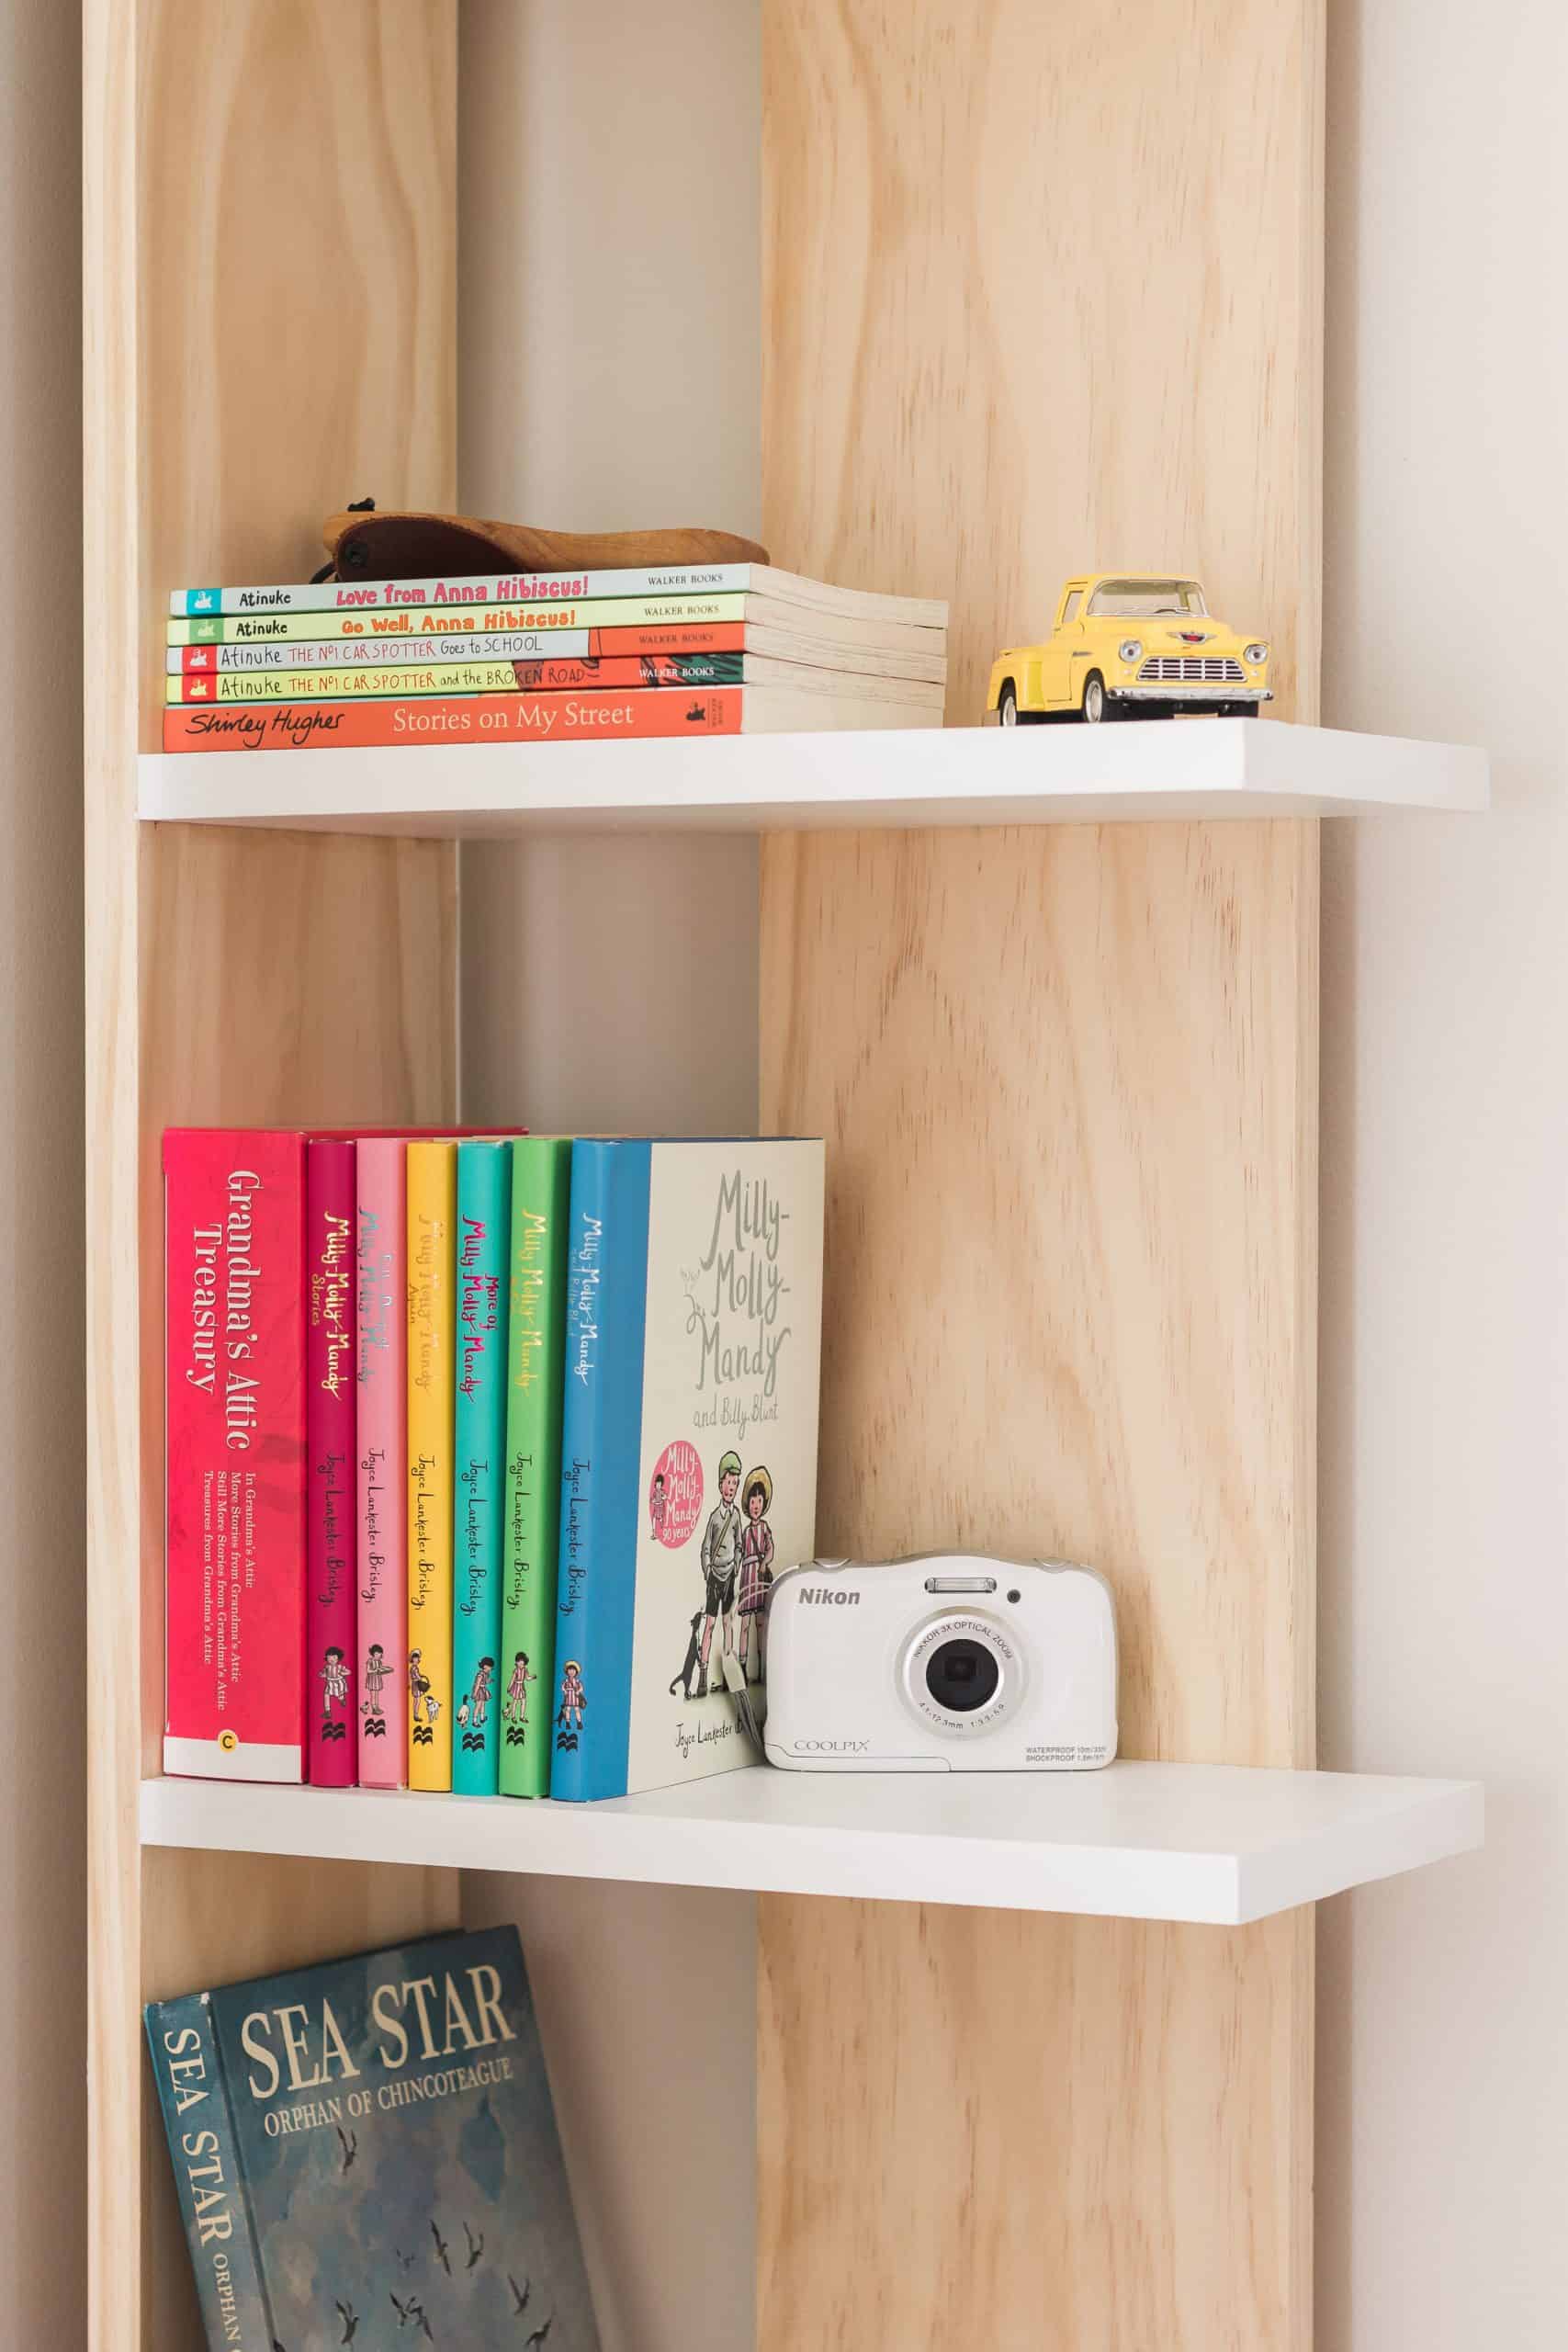 Turn into unused corner into a functional storage space with this easy-to-build and budget-friendly bookcase! You can build it in a day for just $60 dollars. See the complete tutorial at www.freeandunfettered.com. It's perfect for small space living! #diy #bookcase #bookstorage #diyfurniture #modernhome #homeorganization #storageandorganization #diyproject #budgetfriendlydecor #smallspaceliving